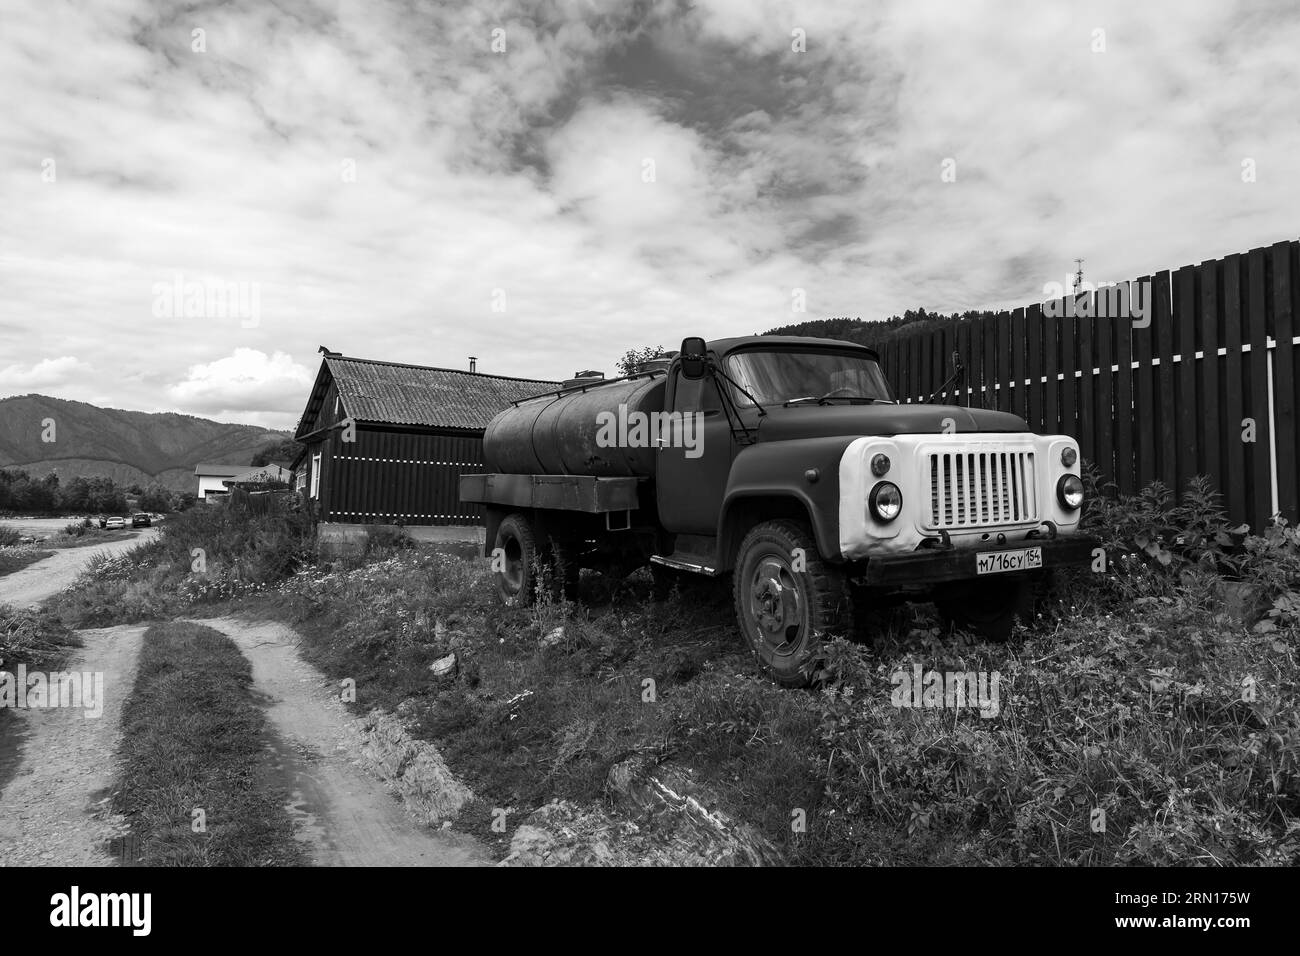 Altai Krai, Russia - August 22, 2022: Soviet truck GAZ-53, water carrier with a tank. It is a 3.5 tonne 4x2 truck produced by GAZ between 1961 and 199 Stock Photo